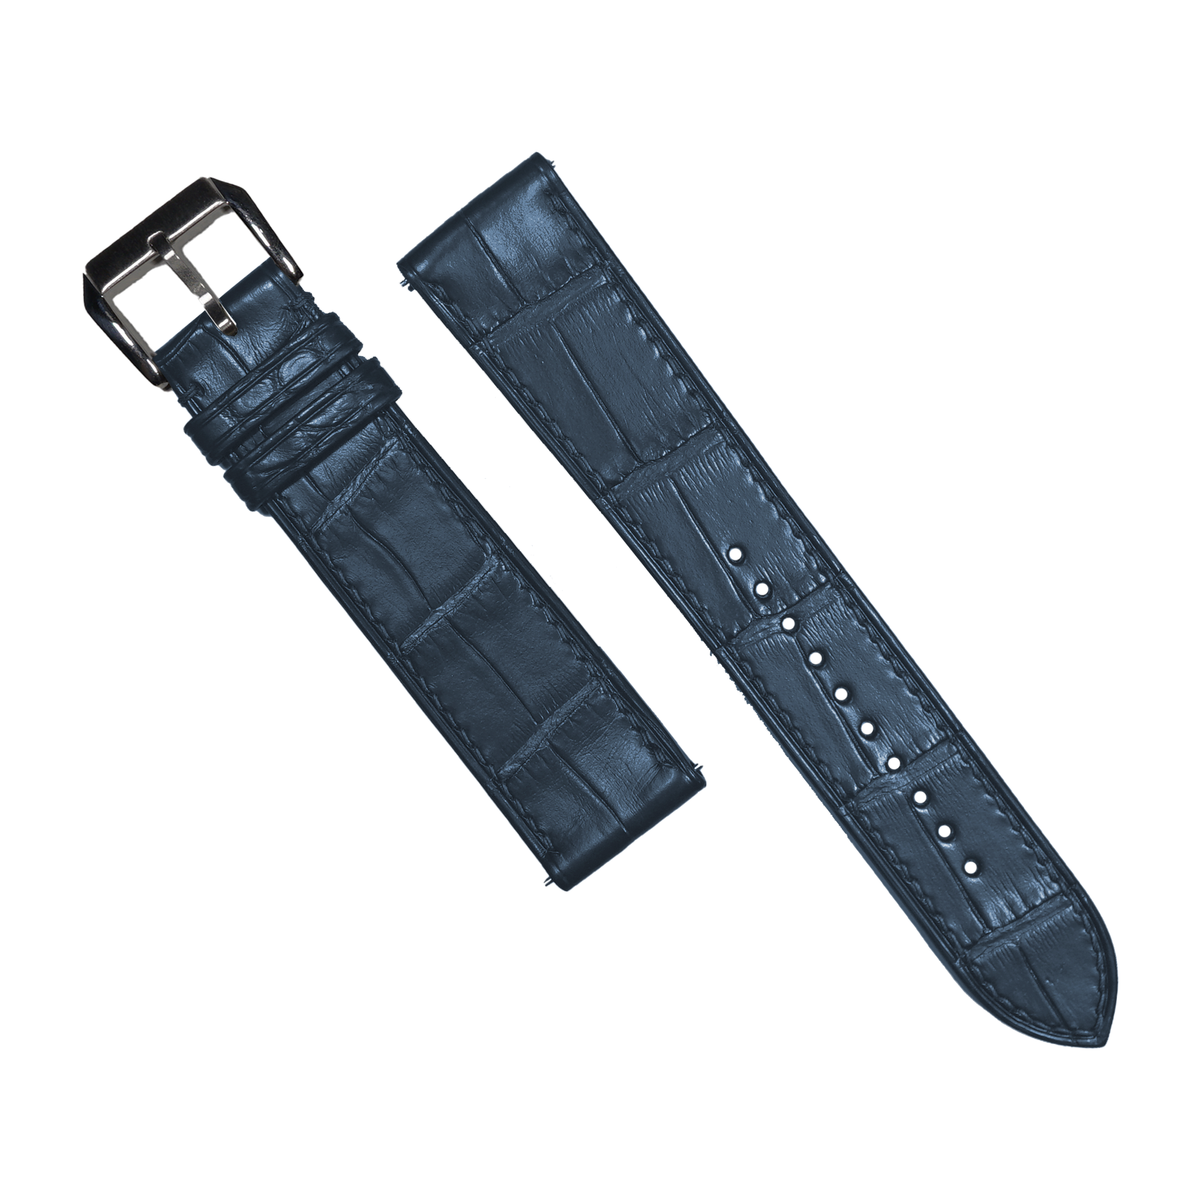 Alligator Leather Watch Strap in Marine (Non-Glossy) - Nomad Watch Works MY